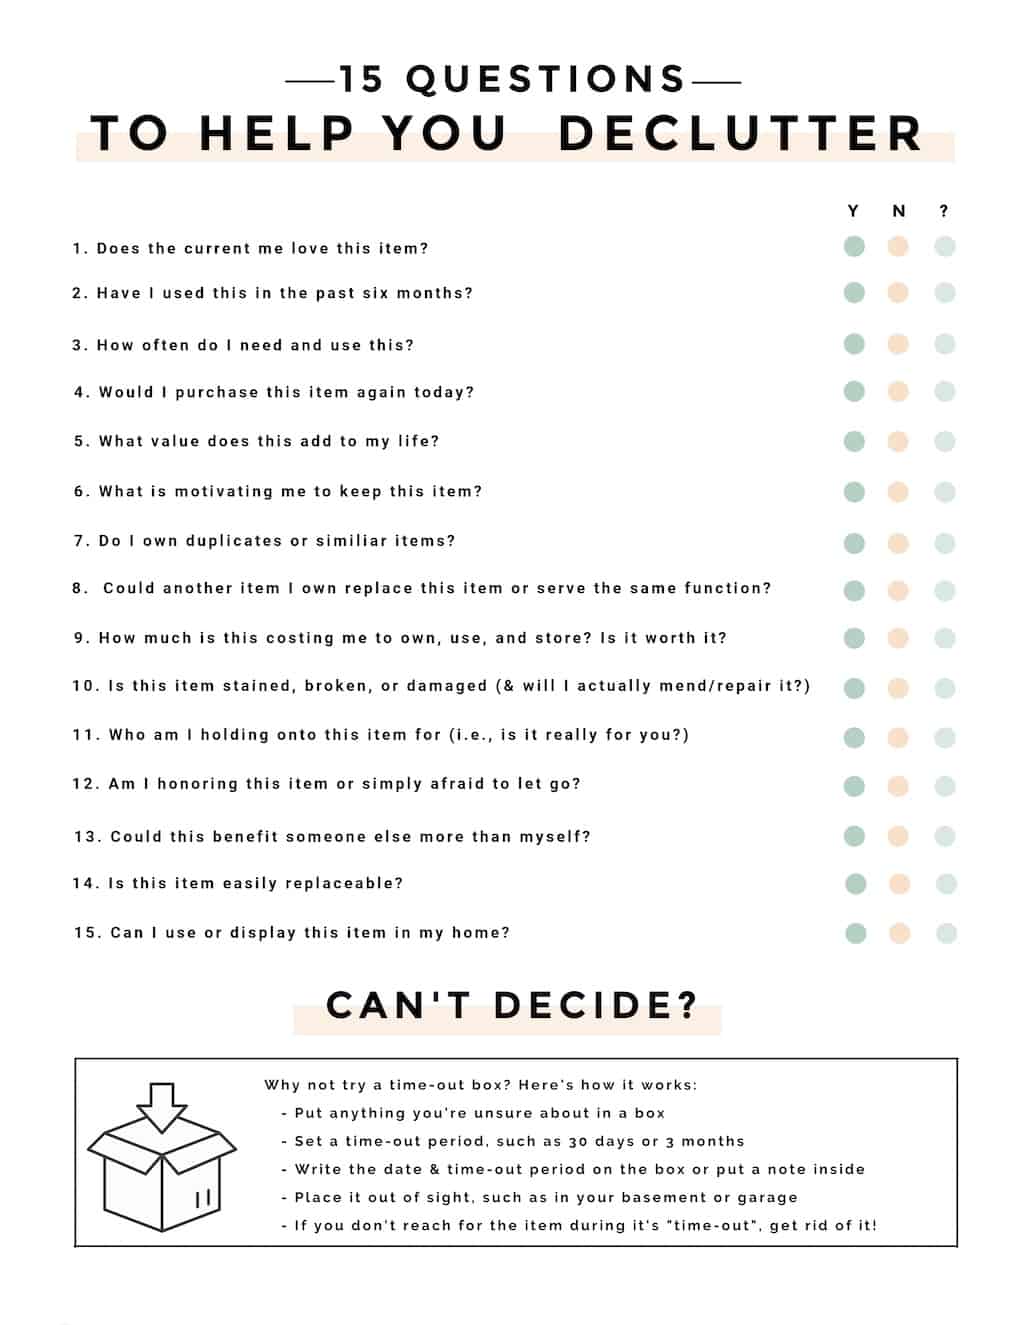 A printable checklist with decluttering questions